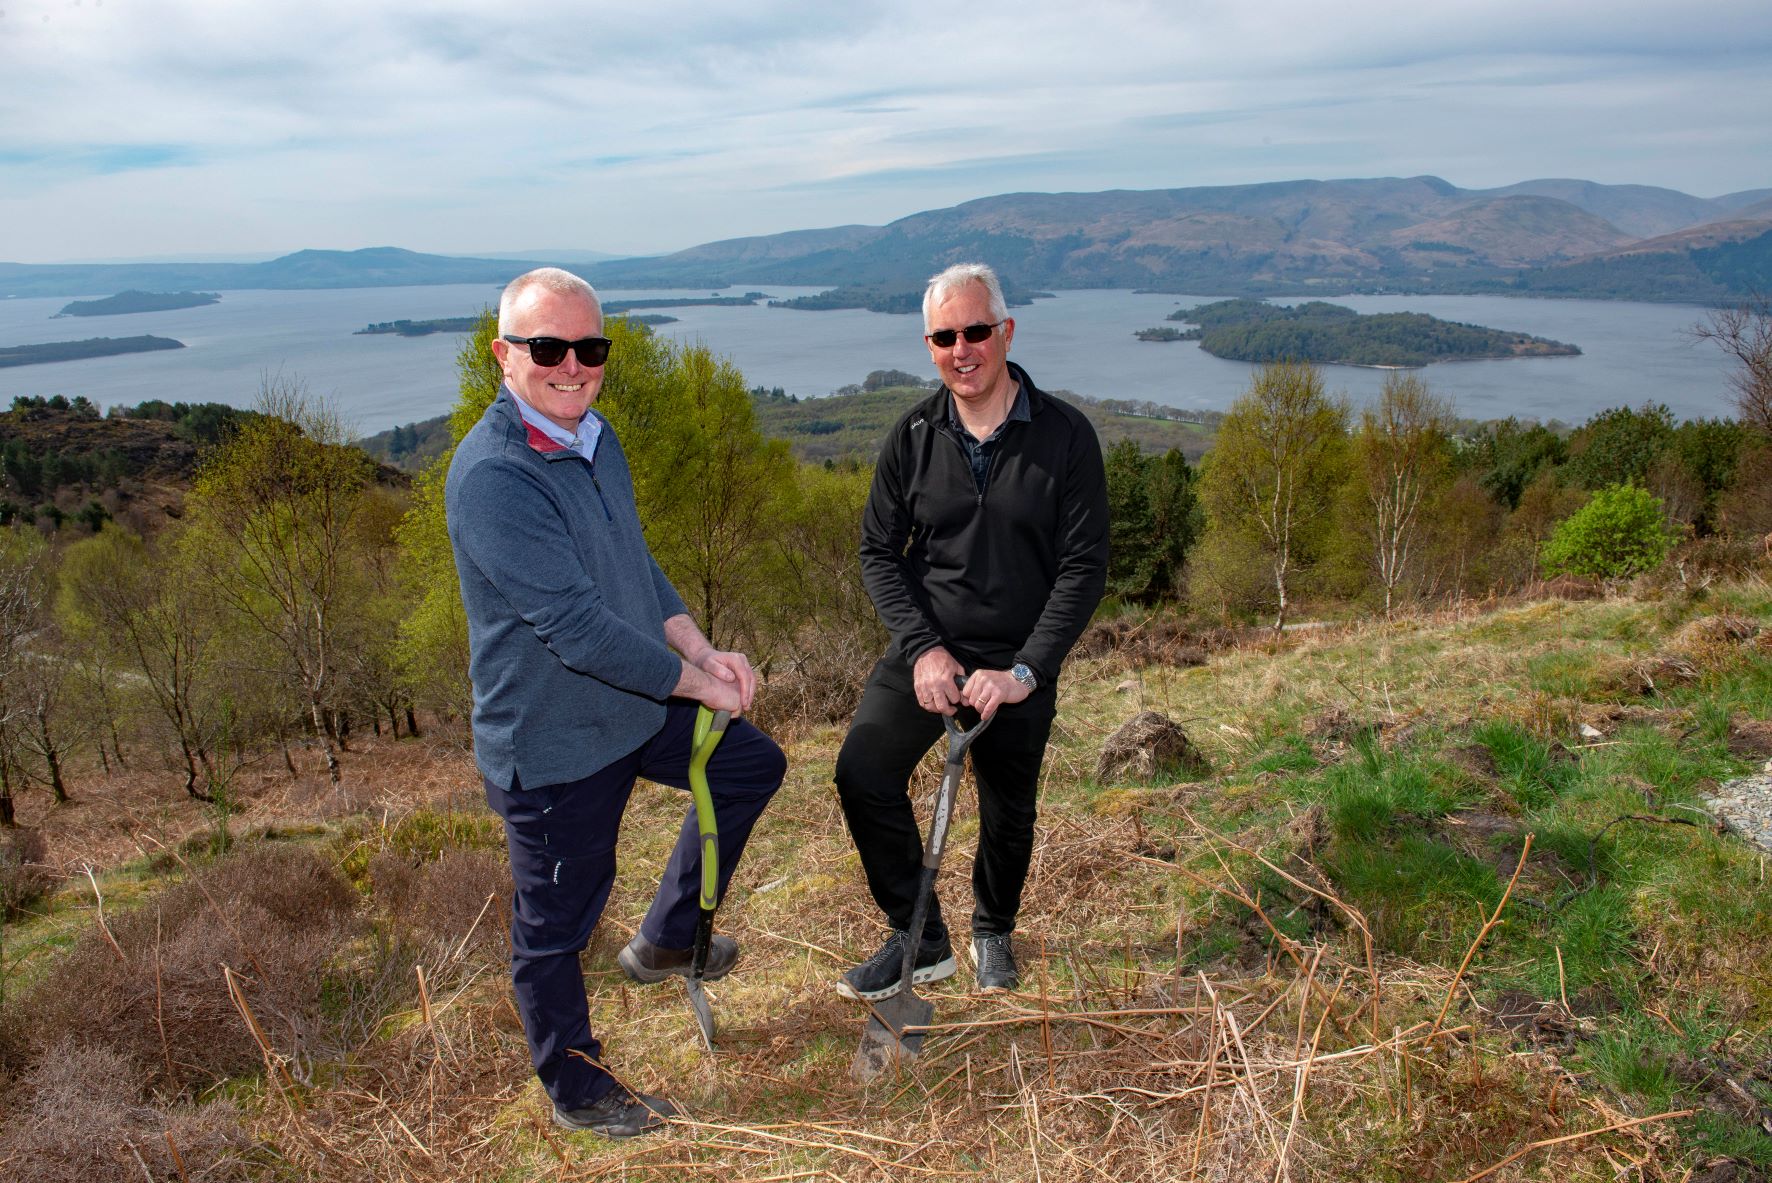 DM Hall plants 125 trees in Cashel Forest to mark 125th anniversary year